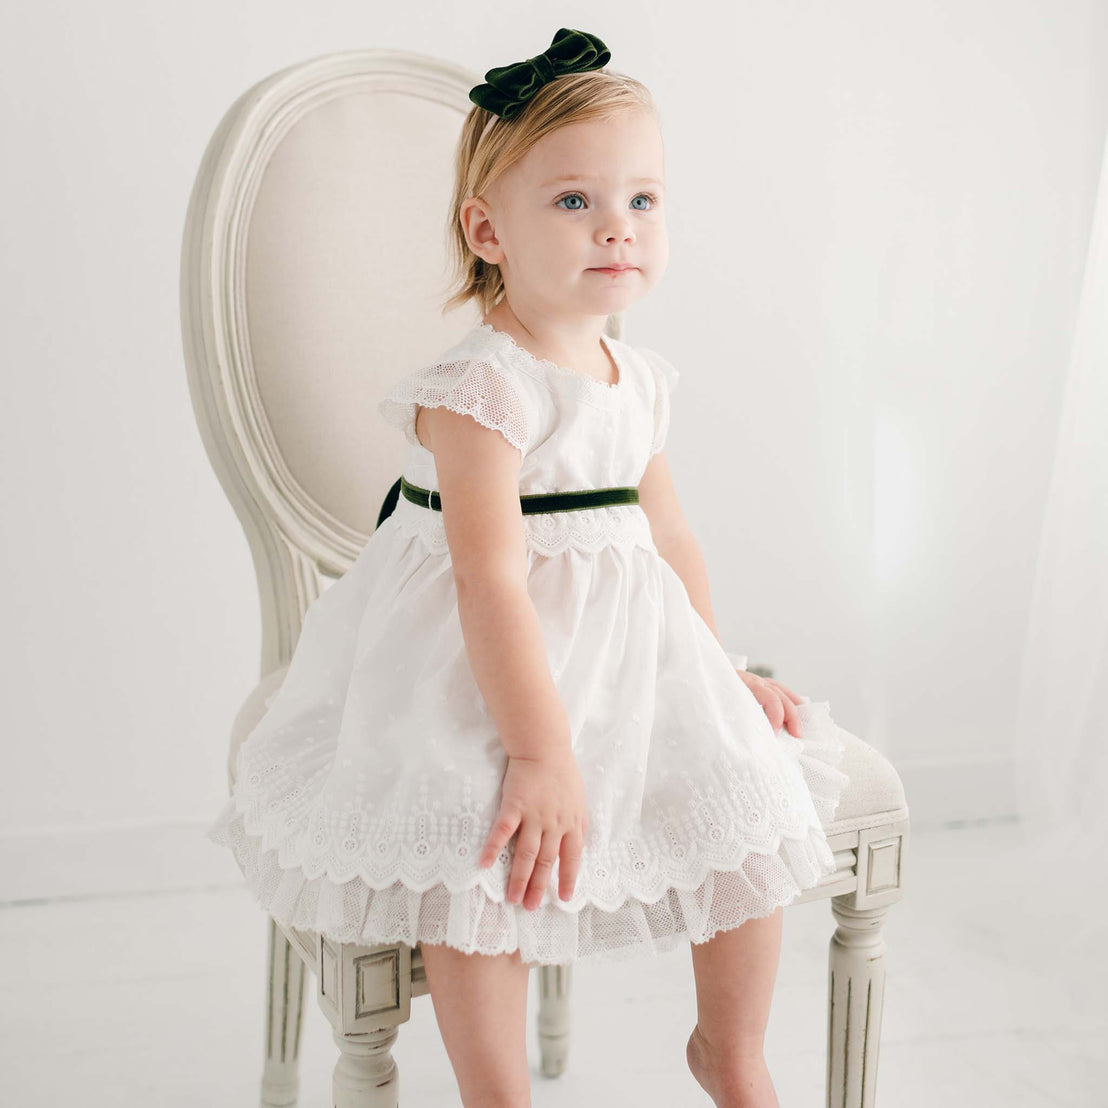 A young girl in an Emily Dress & Bloomers with a Green Sash sits on an upscale chair, looking off to the side, in a bright, minimalist room.